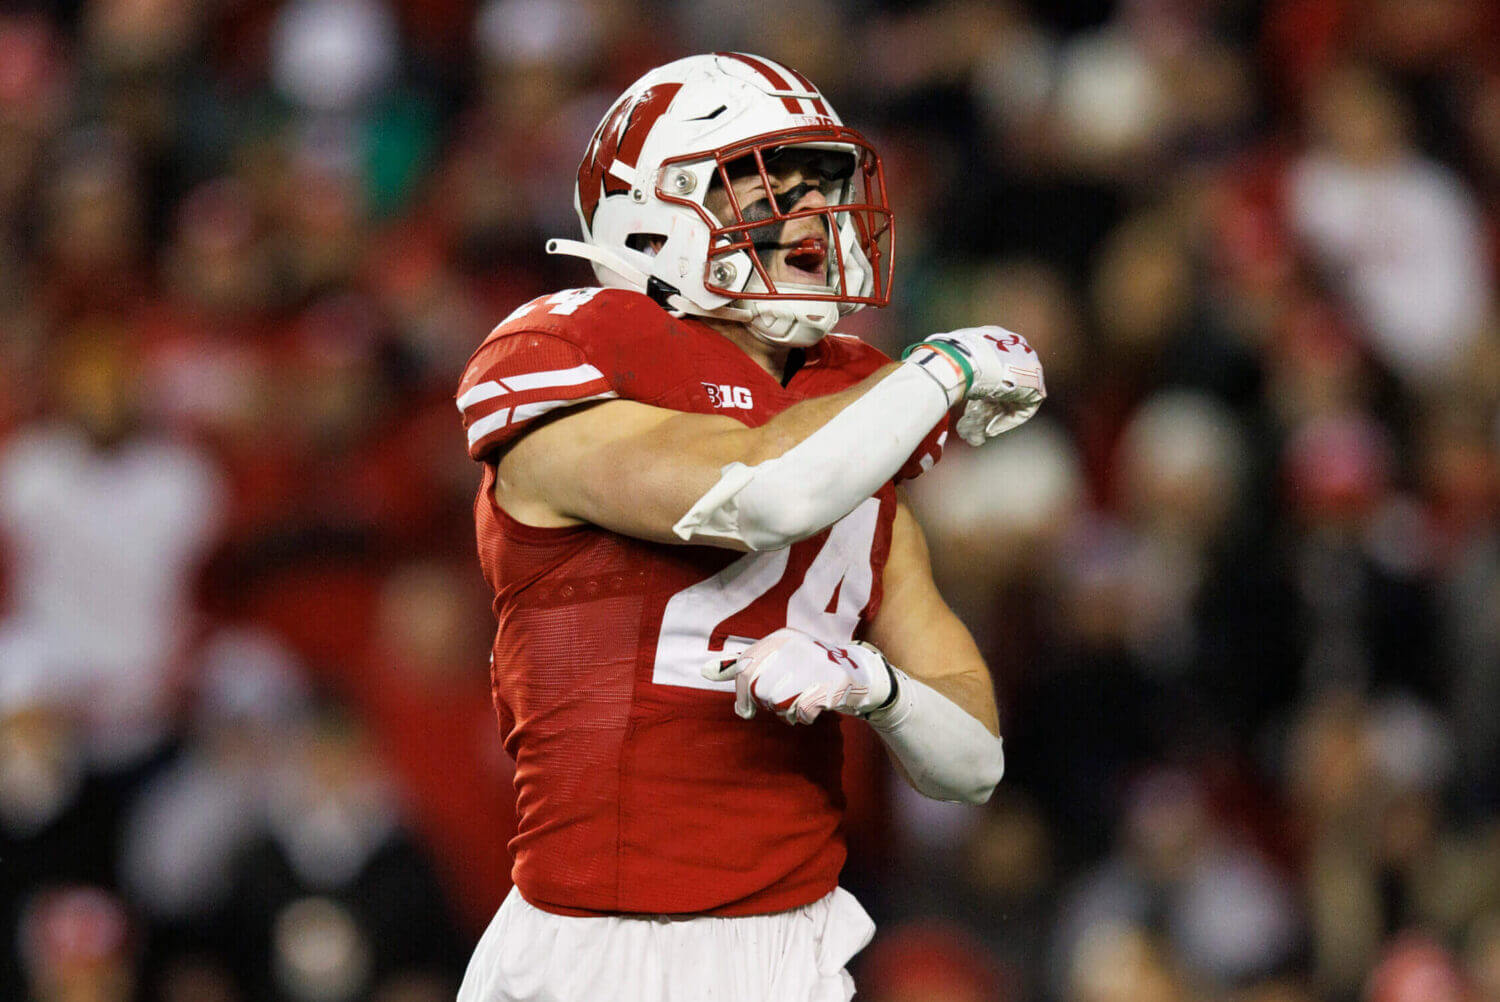 Will Wisconsin look better, worse or the same in Year 2 under Luke Fickell? Mailbag